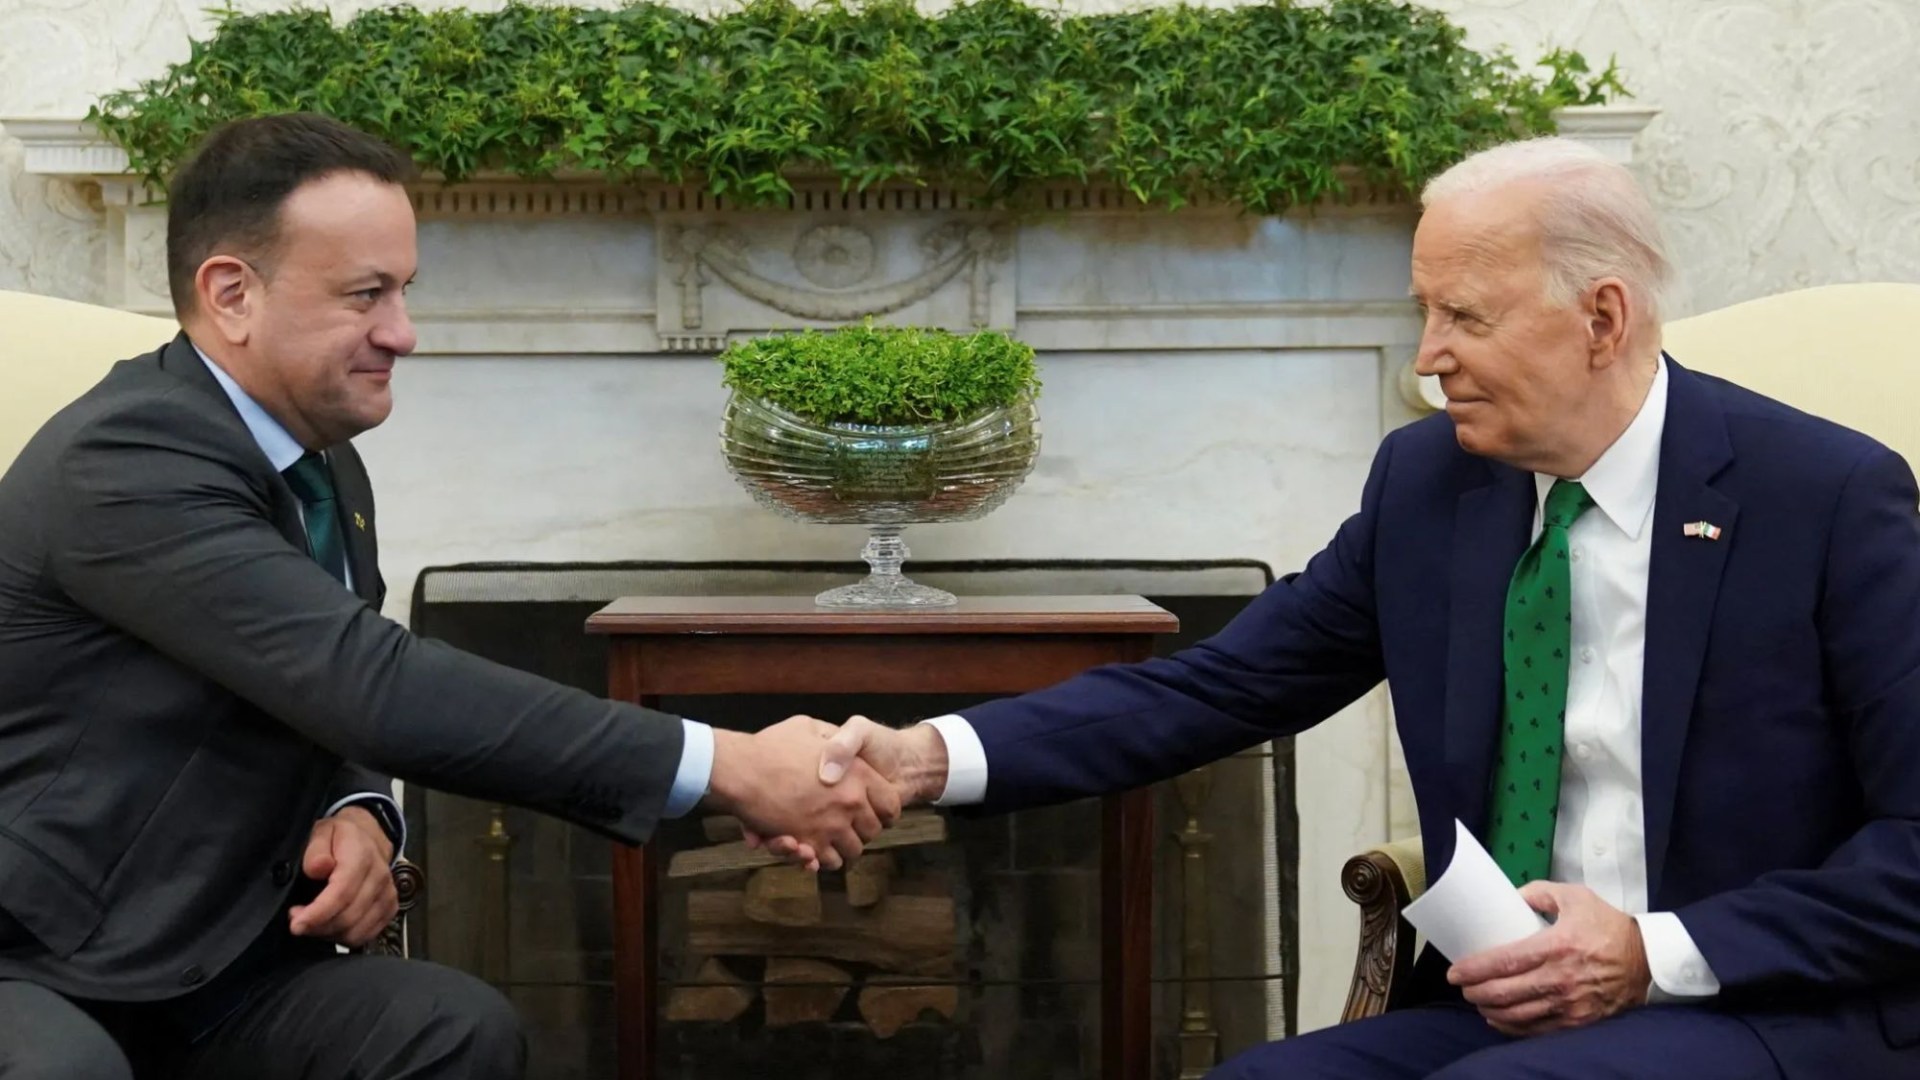 Leo Varadkar defends ‘important’ White House shamrock ceremony with US leader as ‘enormous value’ for ‘small country’ [Video]